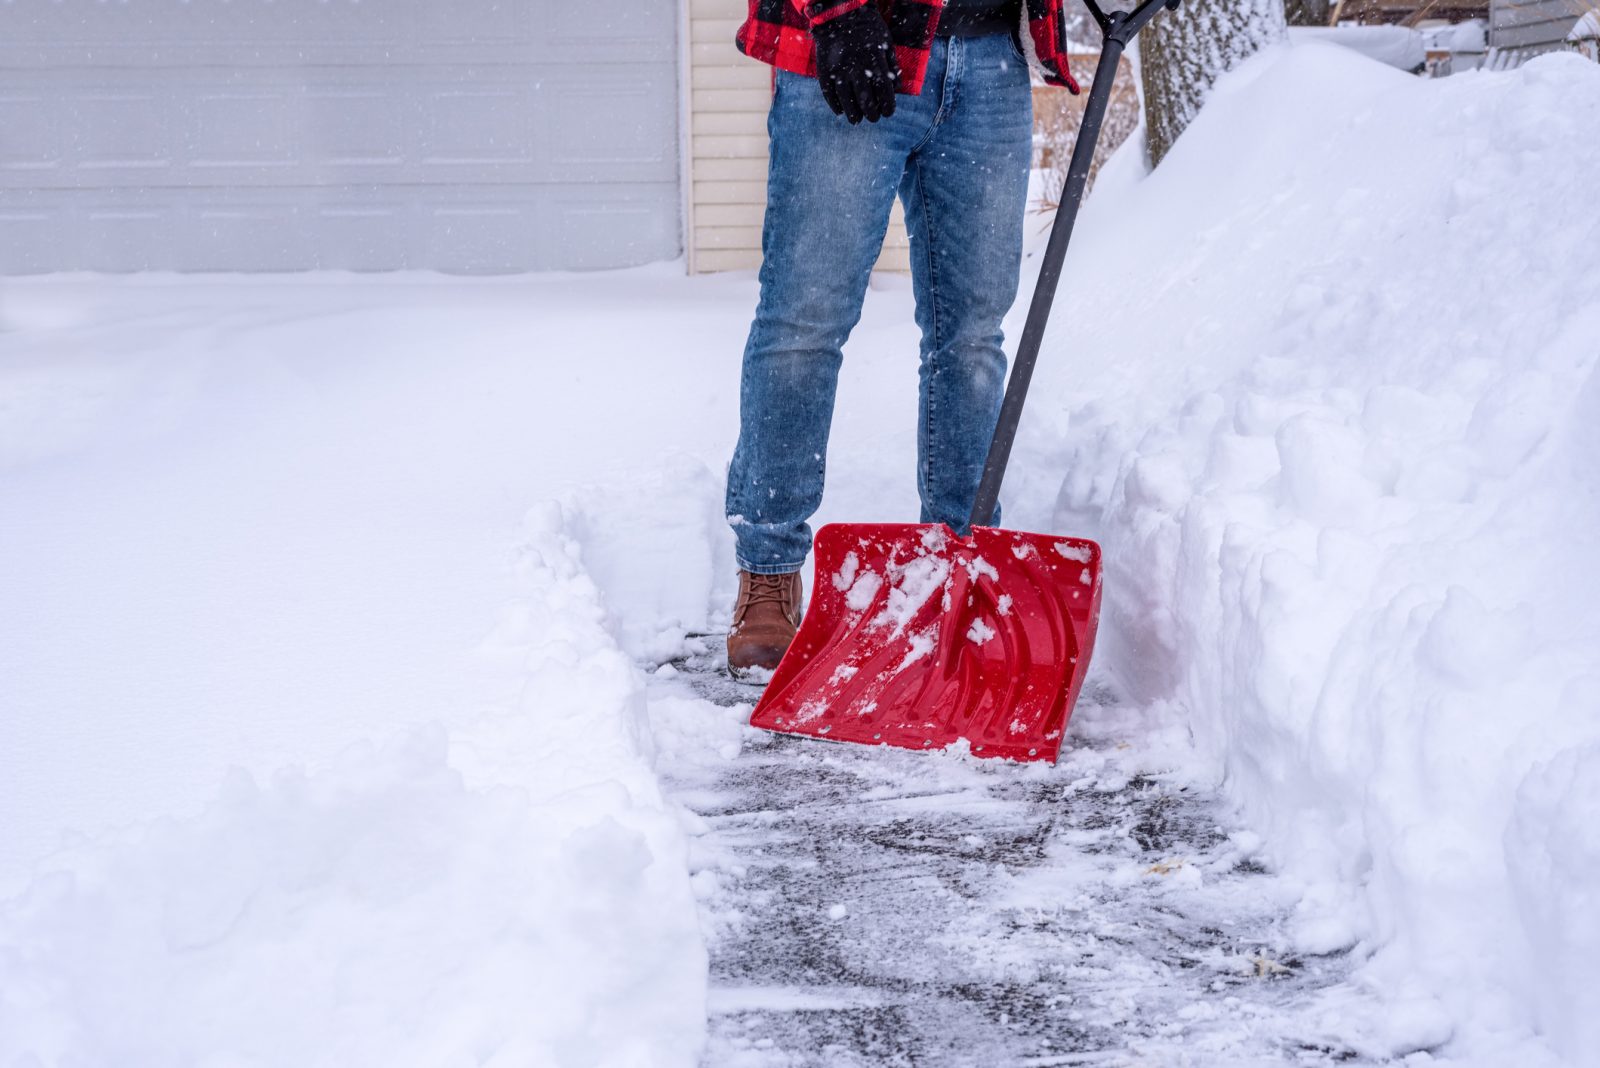 A man shovelling deep snow by hand with a red snow shovel